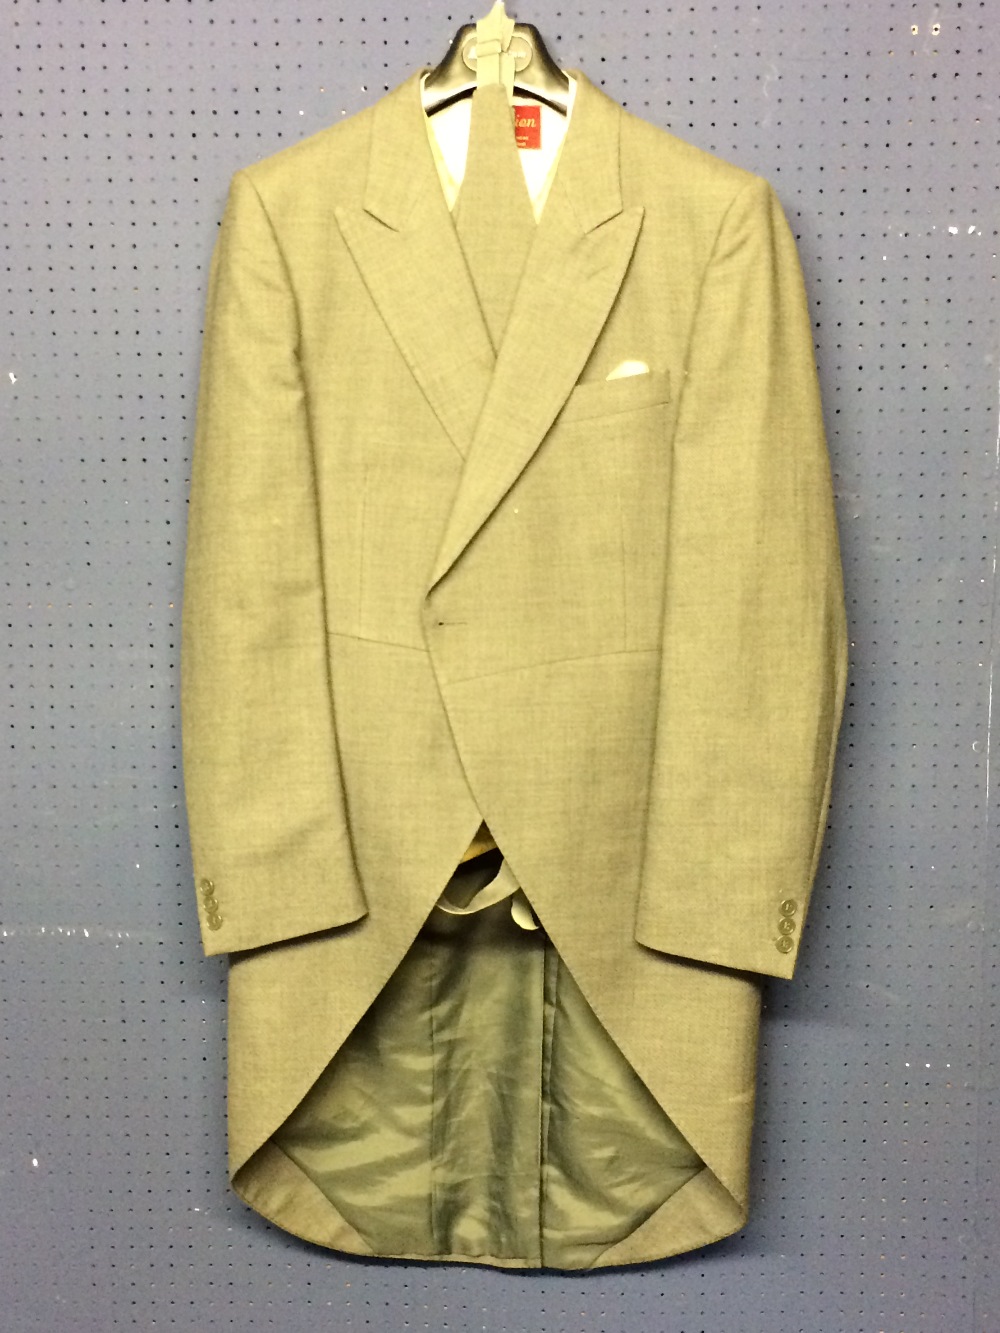 Grey 3 piece morning suit (44L) together with a coloured waistcoat